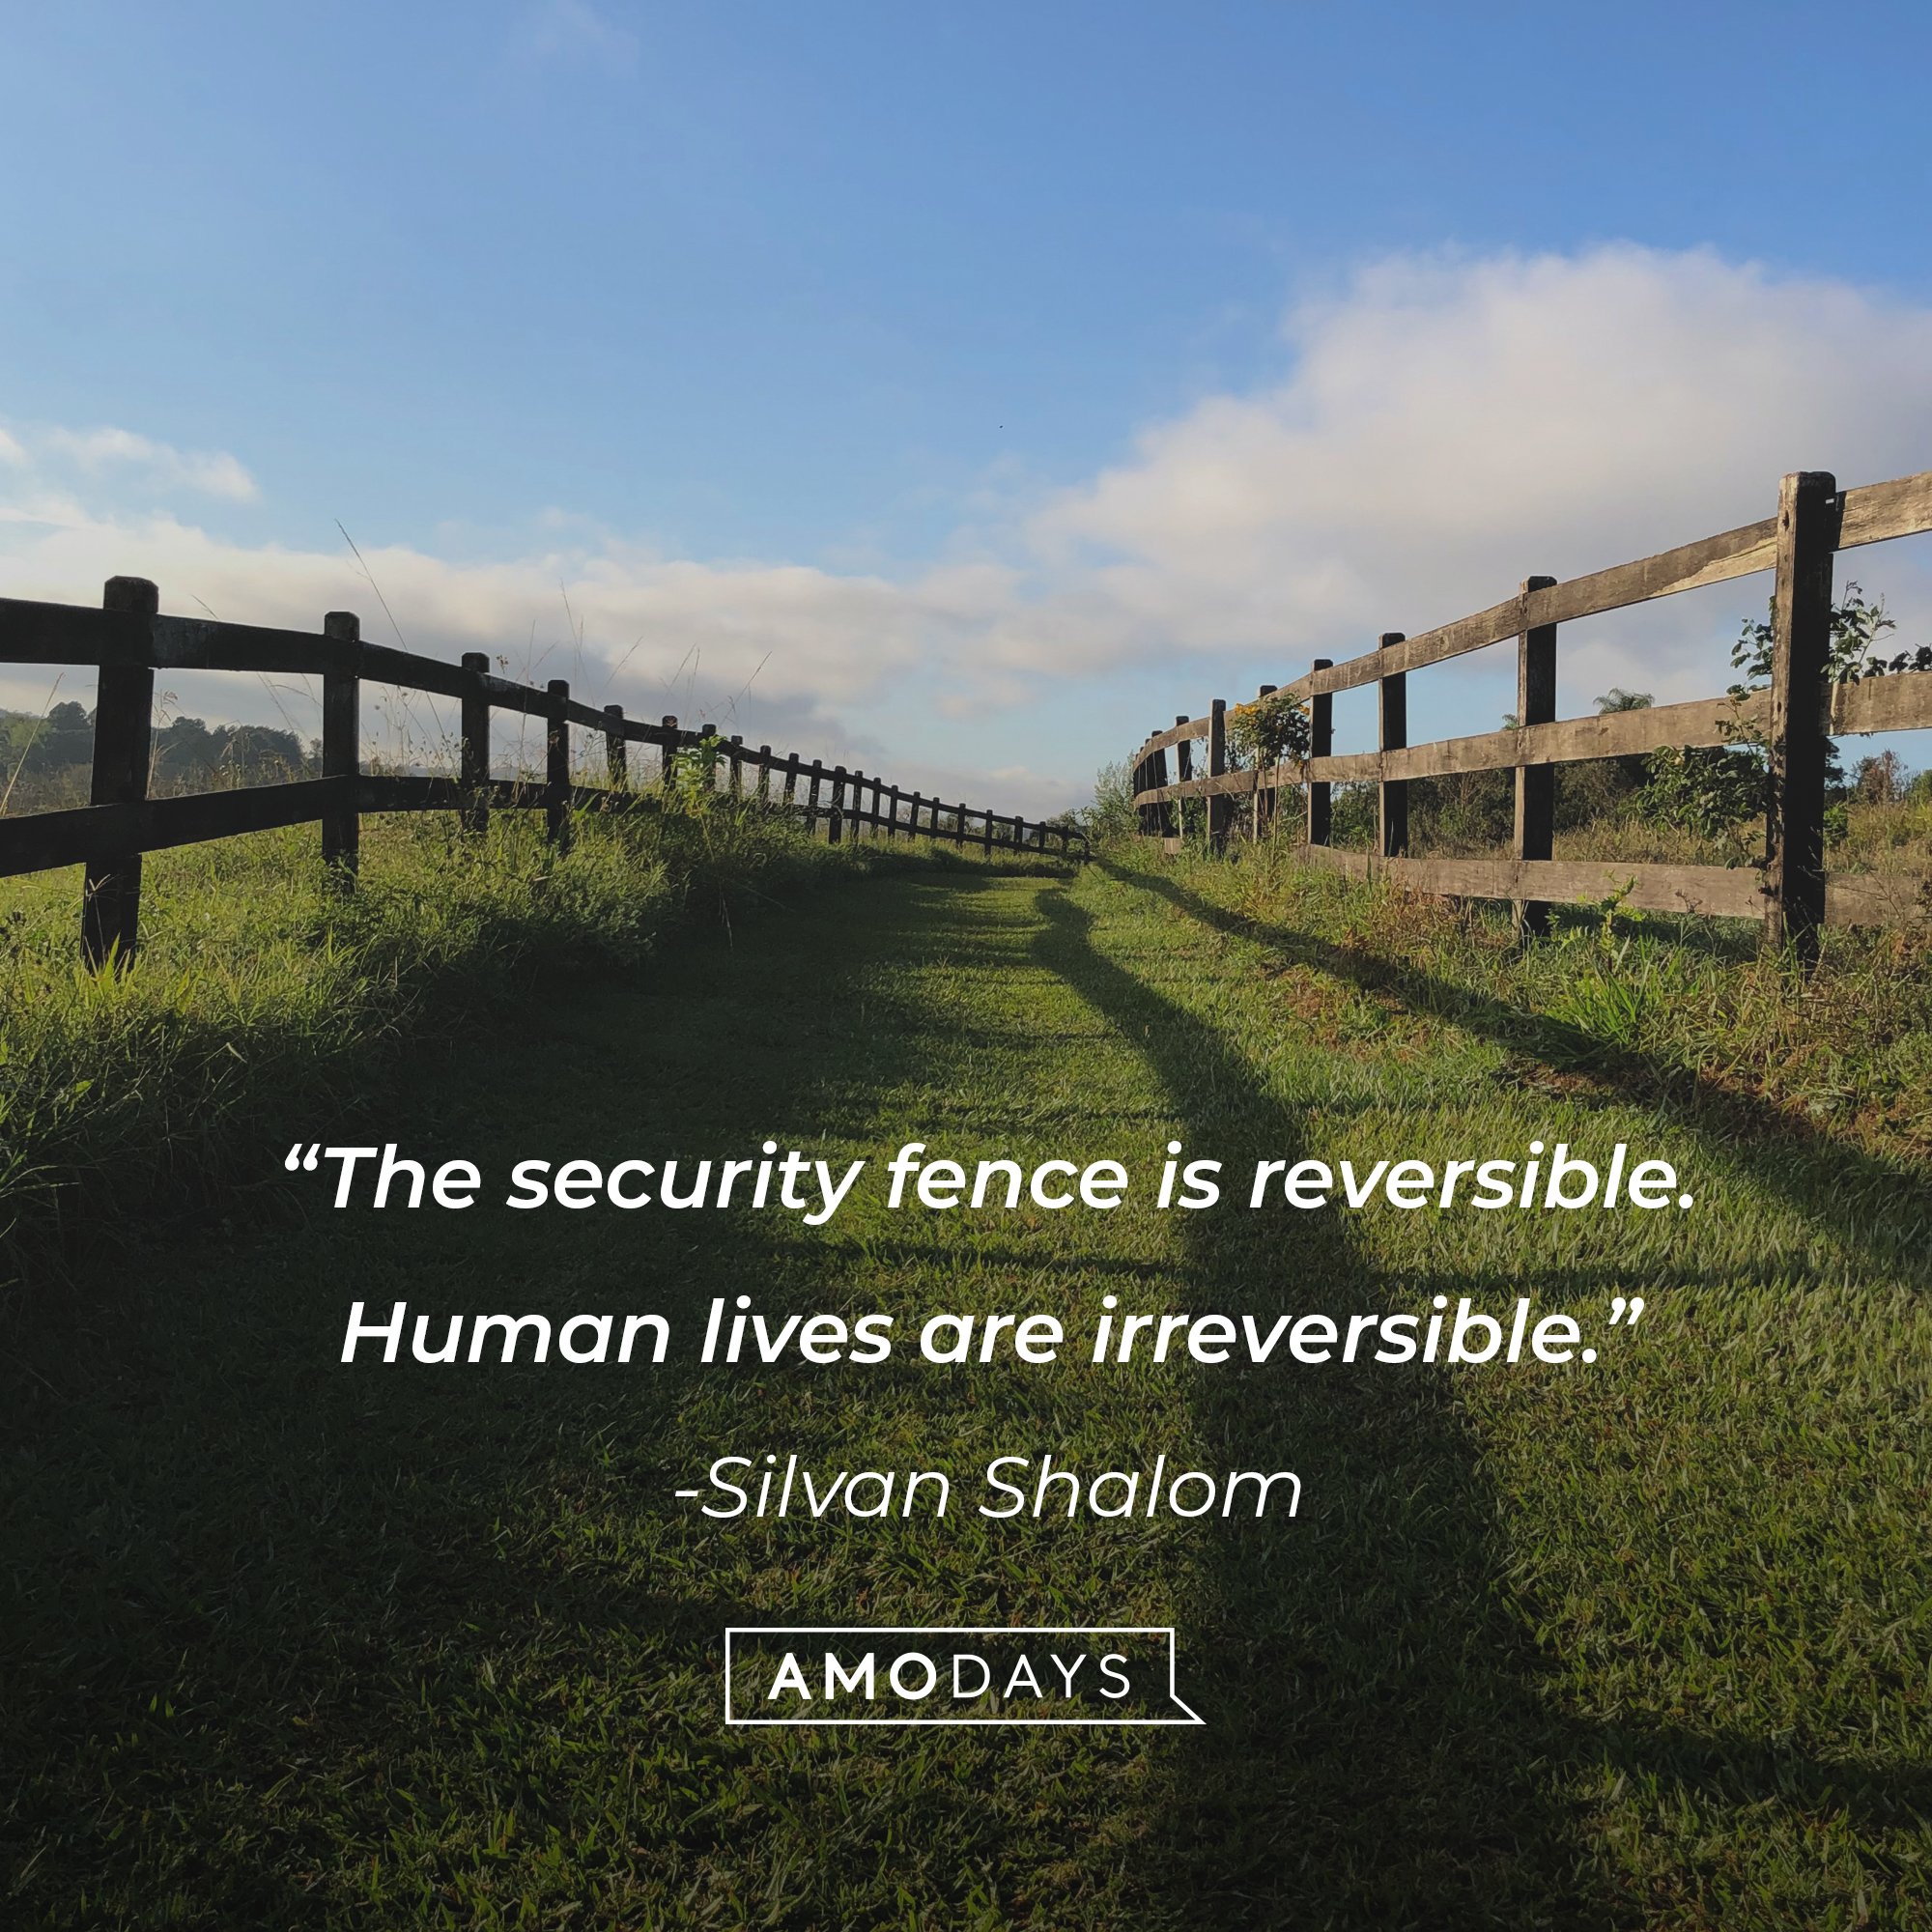 Silvan Shalom's quote: “The security fence is reversible. Human lives are irreversible.” | Image: AmoDays